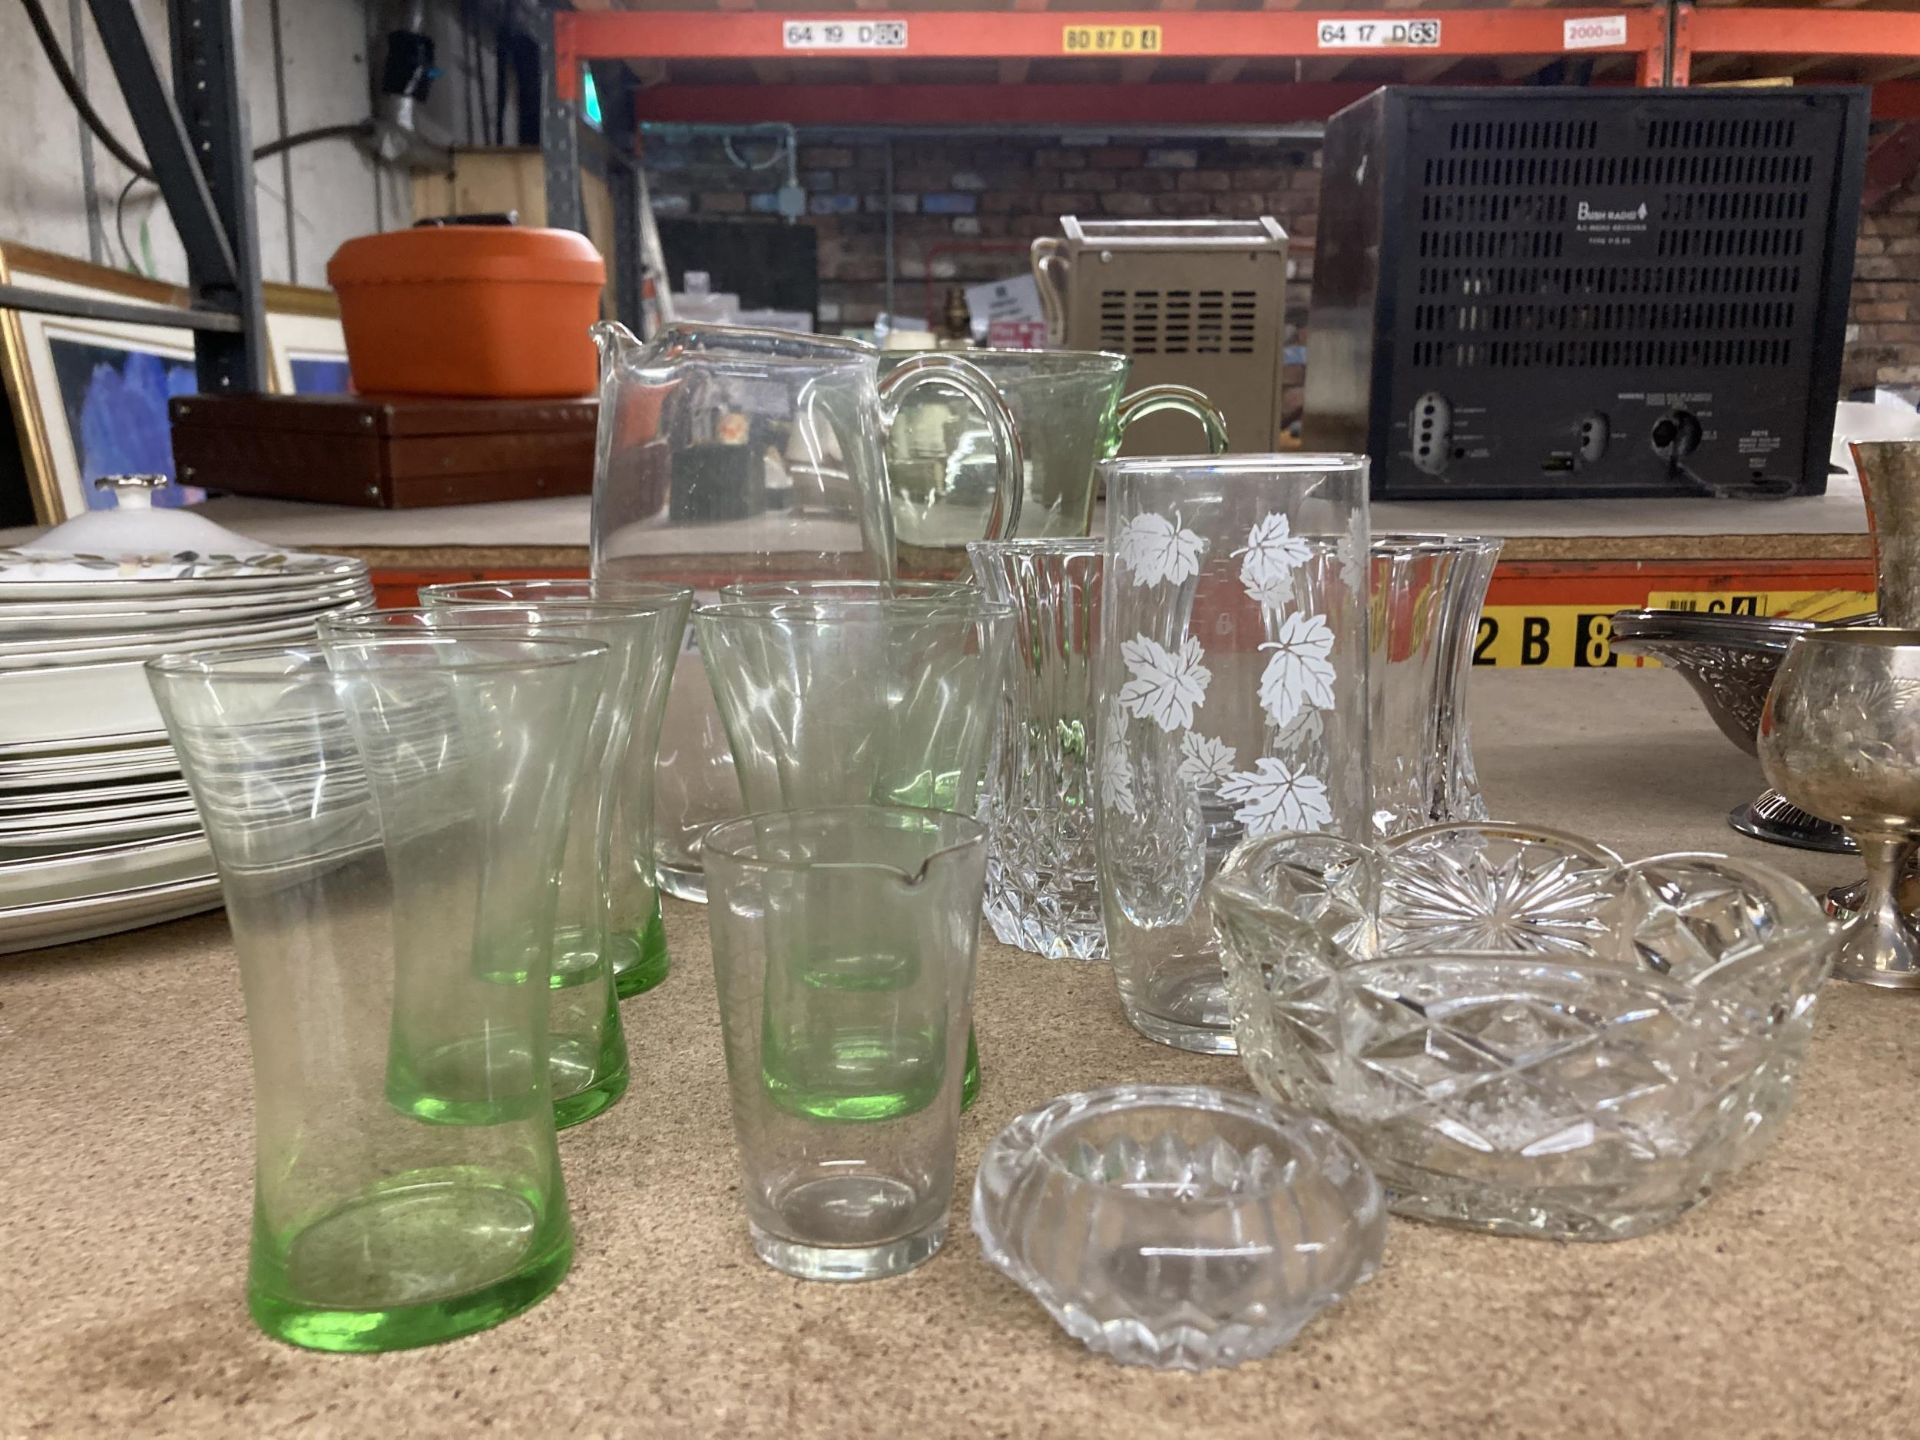 A GROUP OF VINTAGE GLASS ITEMS, GREEN GLASS SET ETC